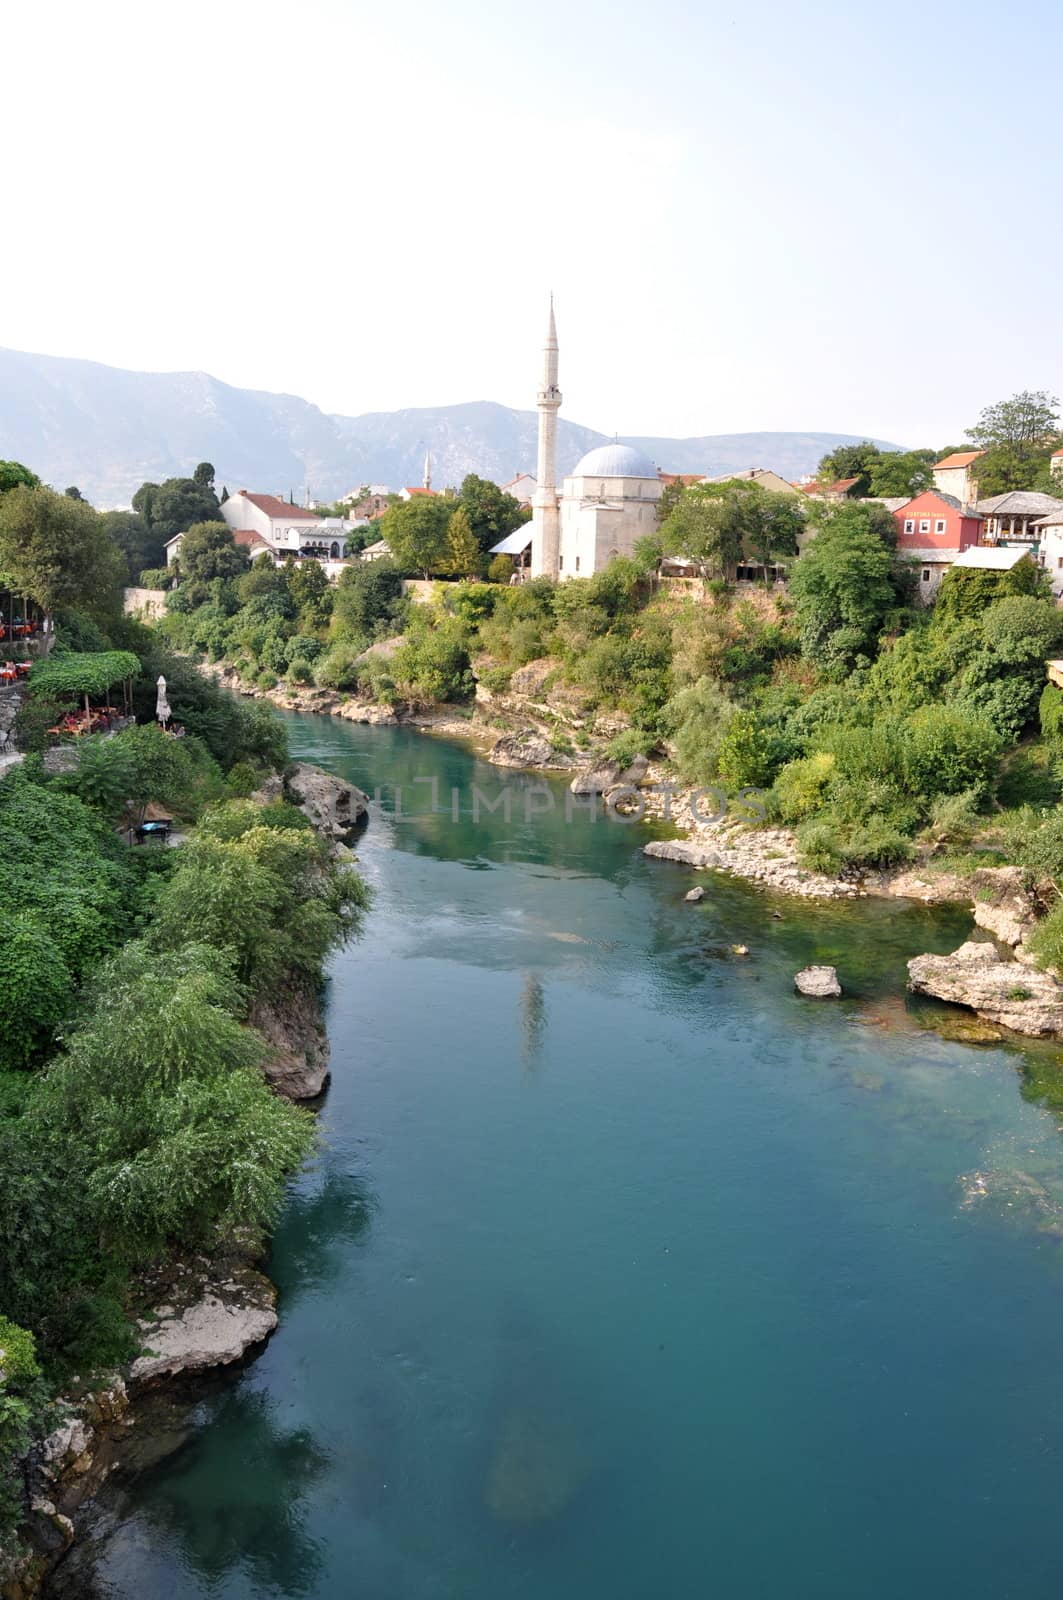 View of Mostar in Bosnia Hercegovina by anderm